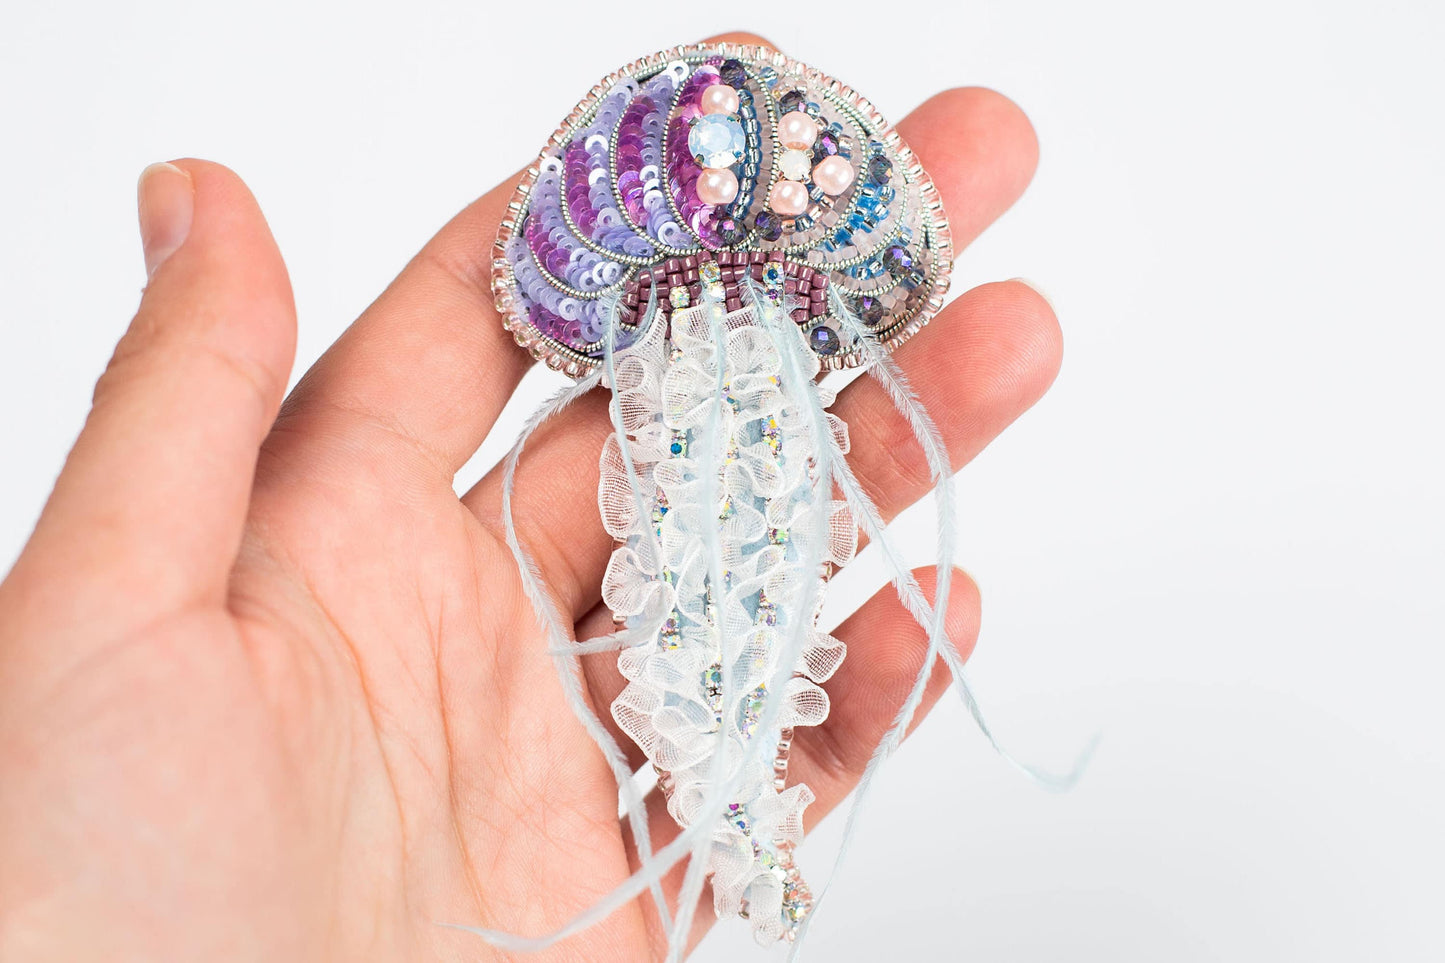 Jellyfish Bead embroidery kit. DIY craft kit Jellyfish. Jellyfish Brooch with Feather Tentacles. Bead Brooch kit. Needlework beading